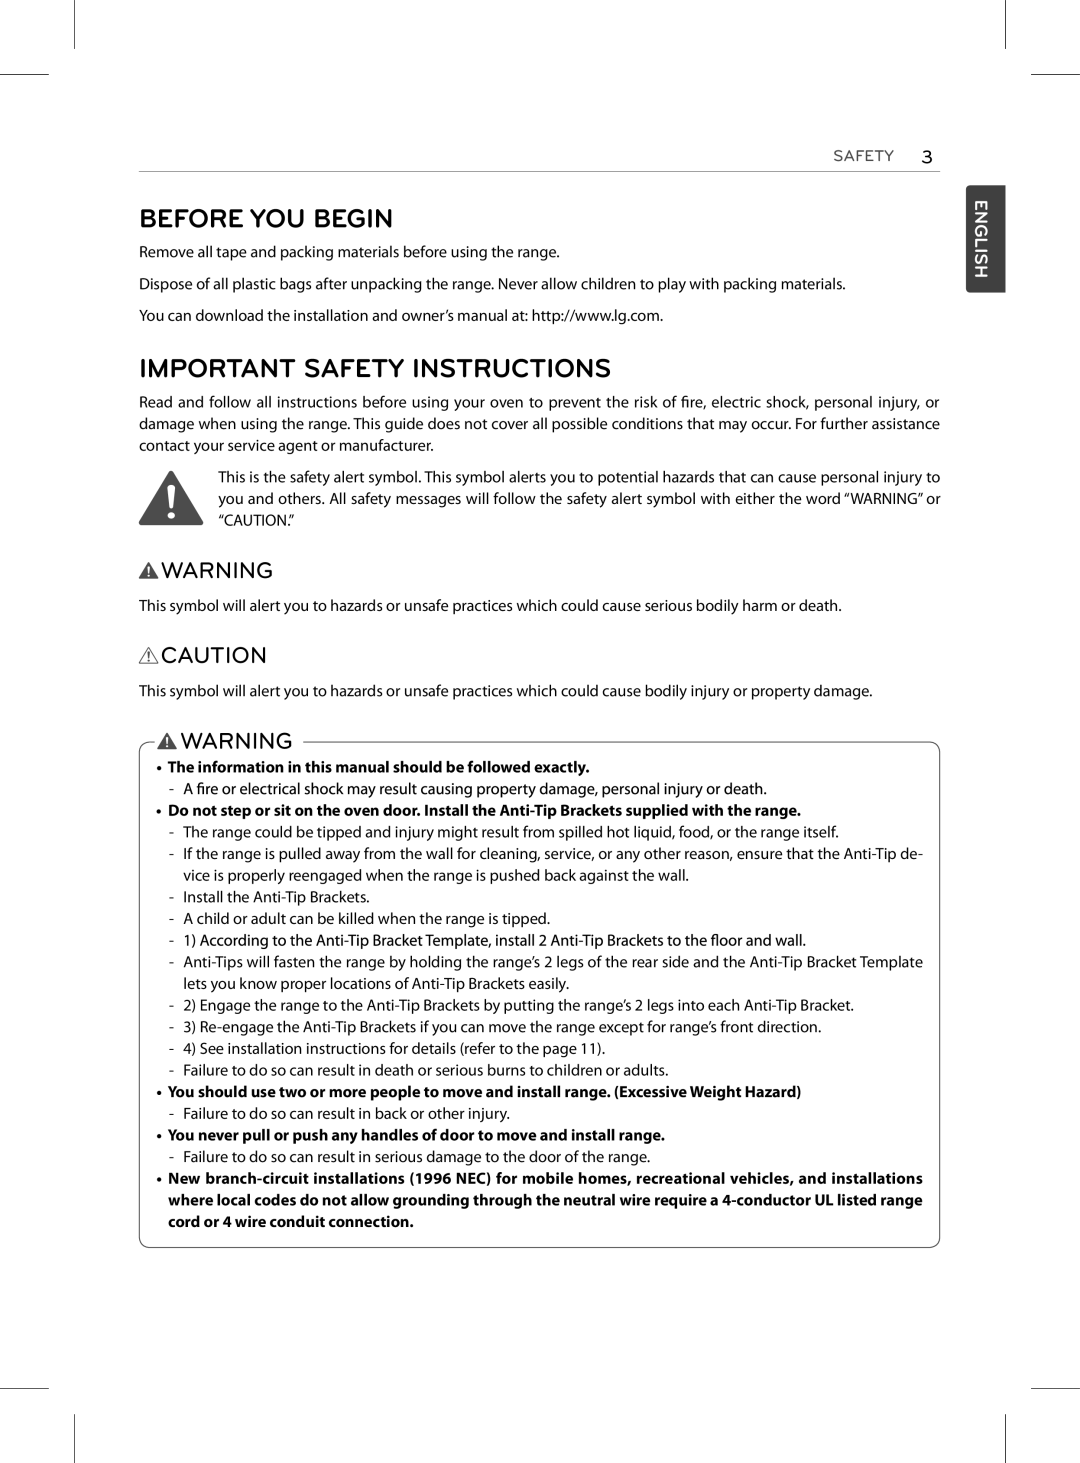 LG Electronics LRE3023ST, LRE3025SB, LRE3025SW, LRE3023SB, LRE3023SW Before You Begin, Important Safety Instructions, English 